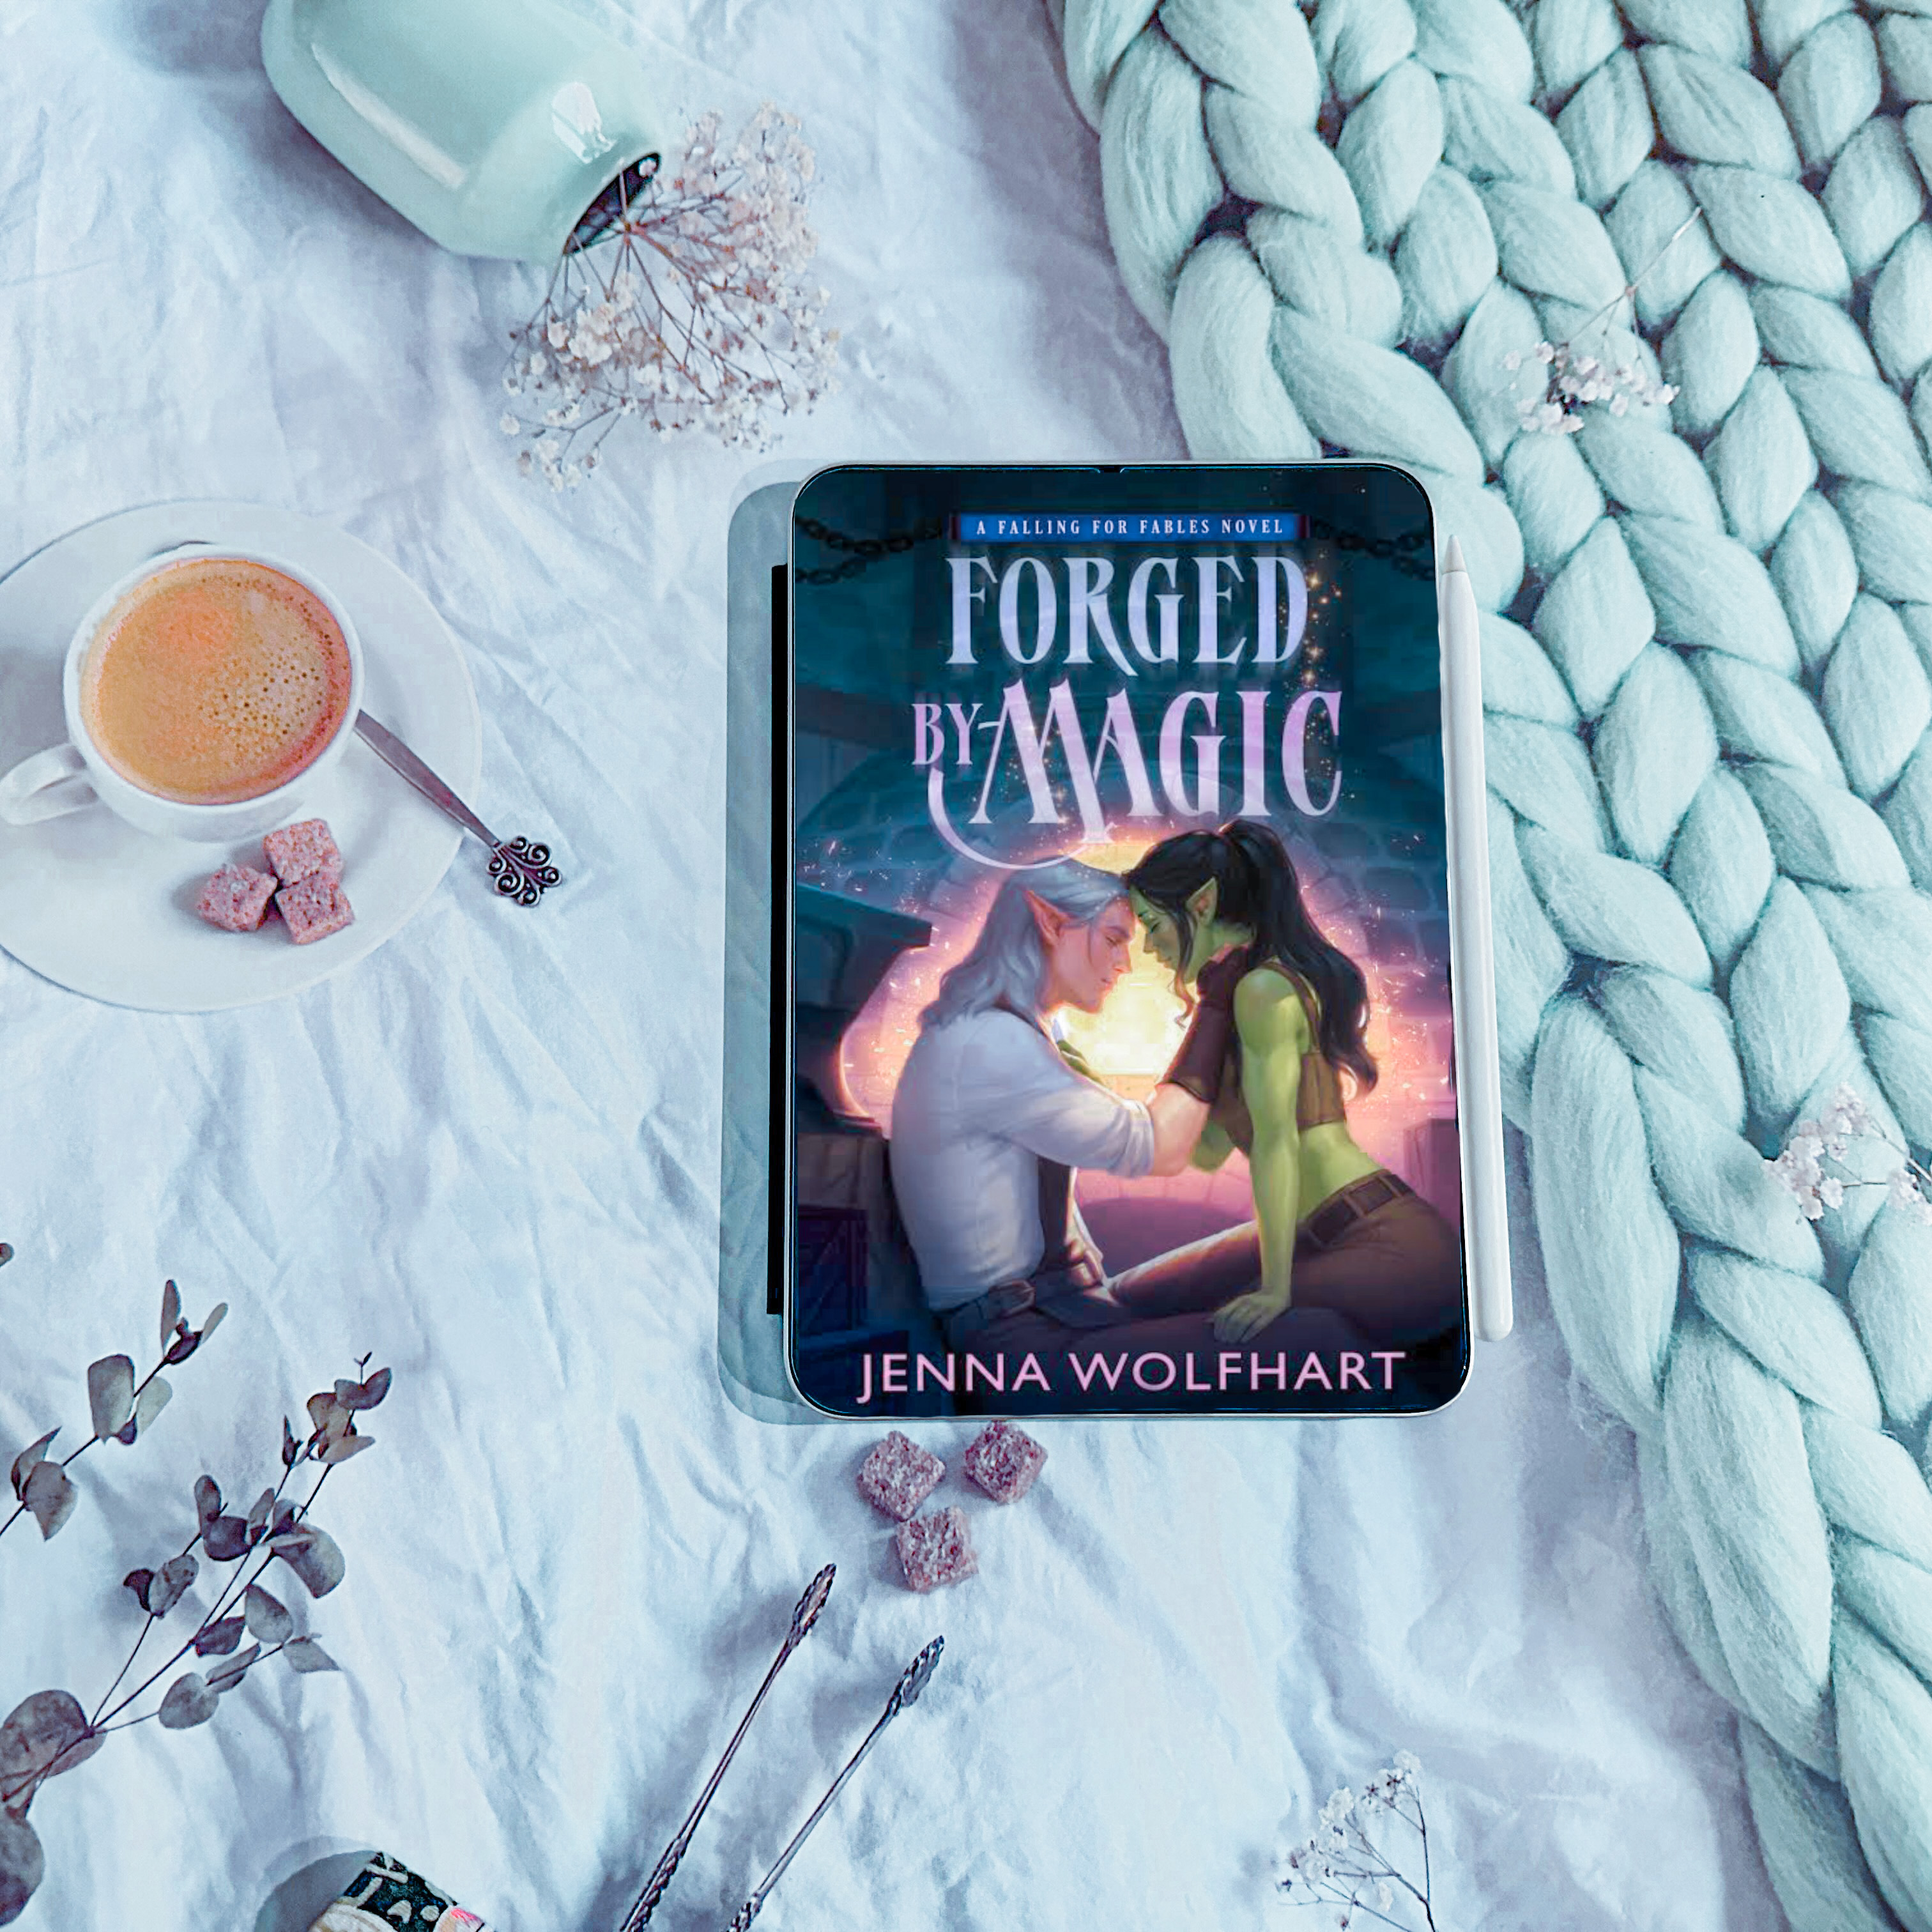 Book Review: Forged by Magic by Jenna Wolfhart